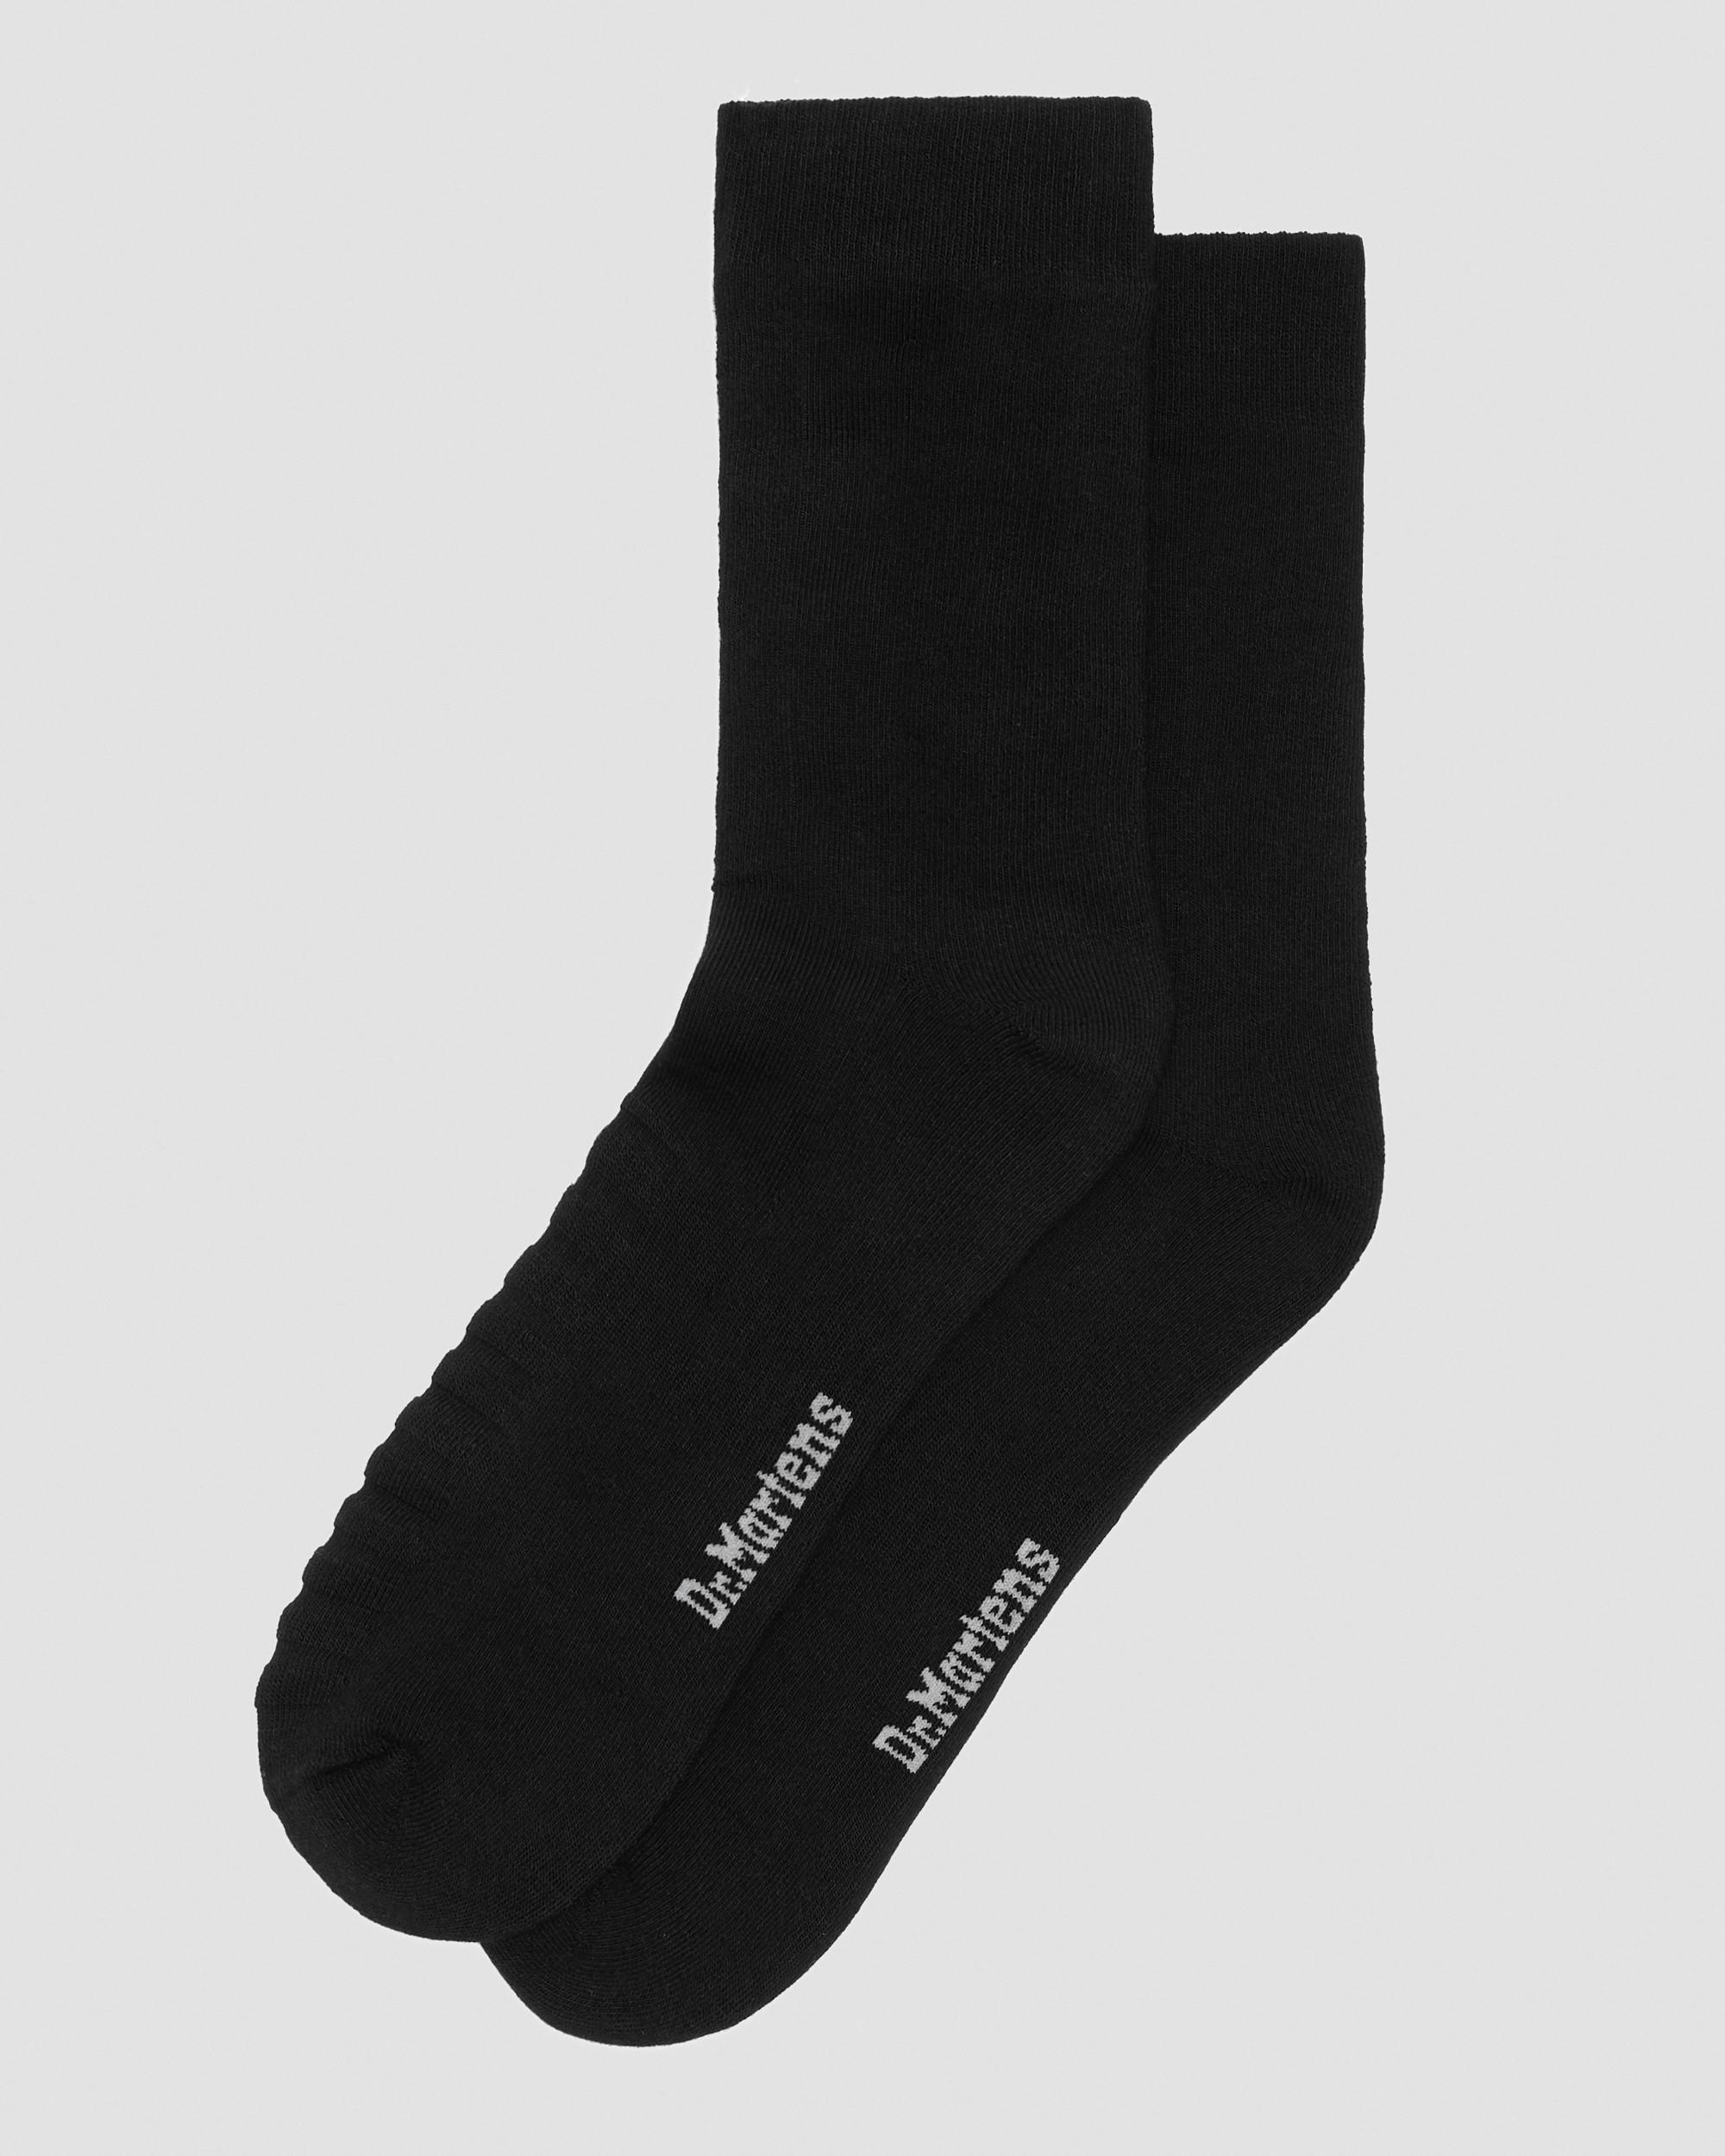 Double Doc Cotton Blend Socks in Black+Yellow